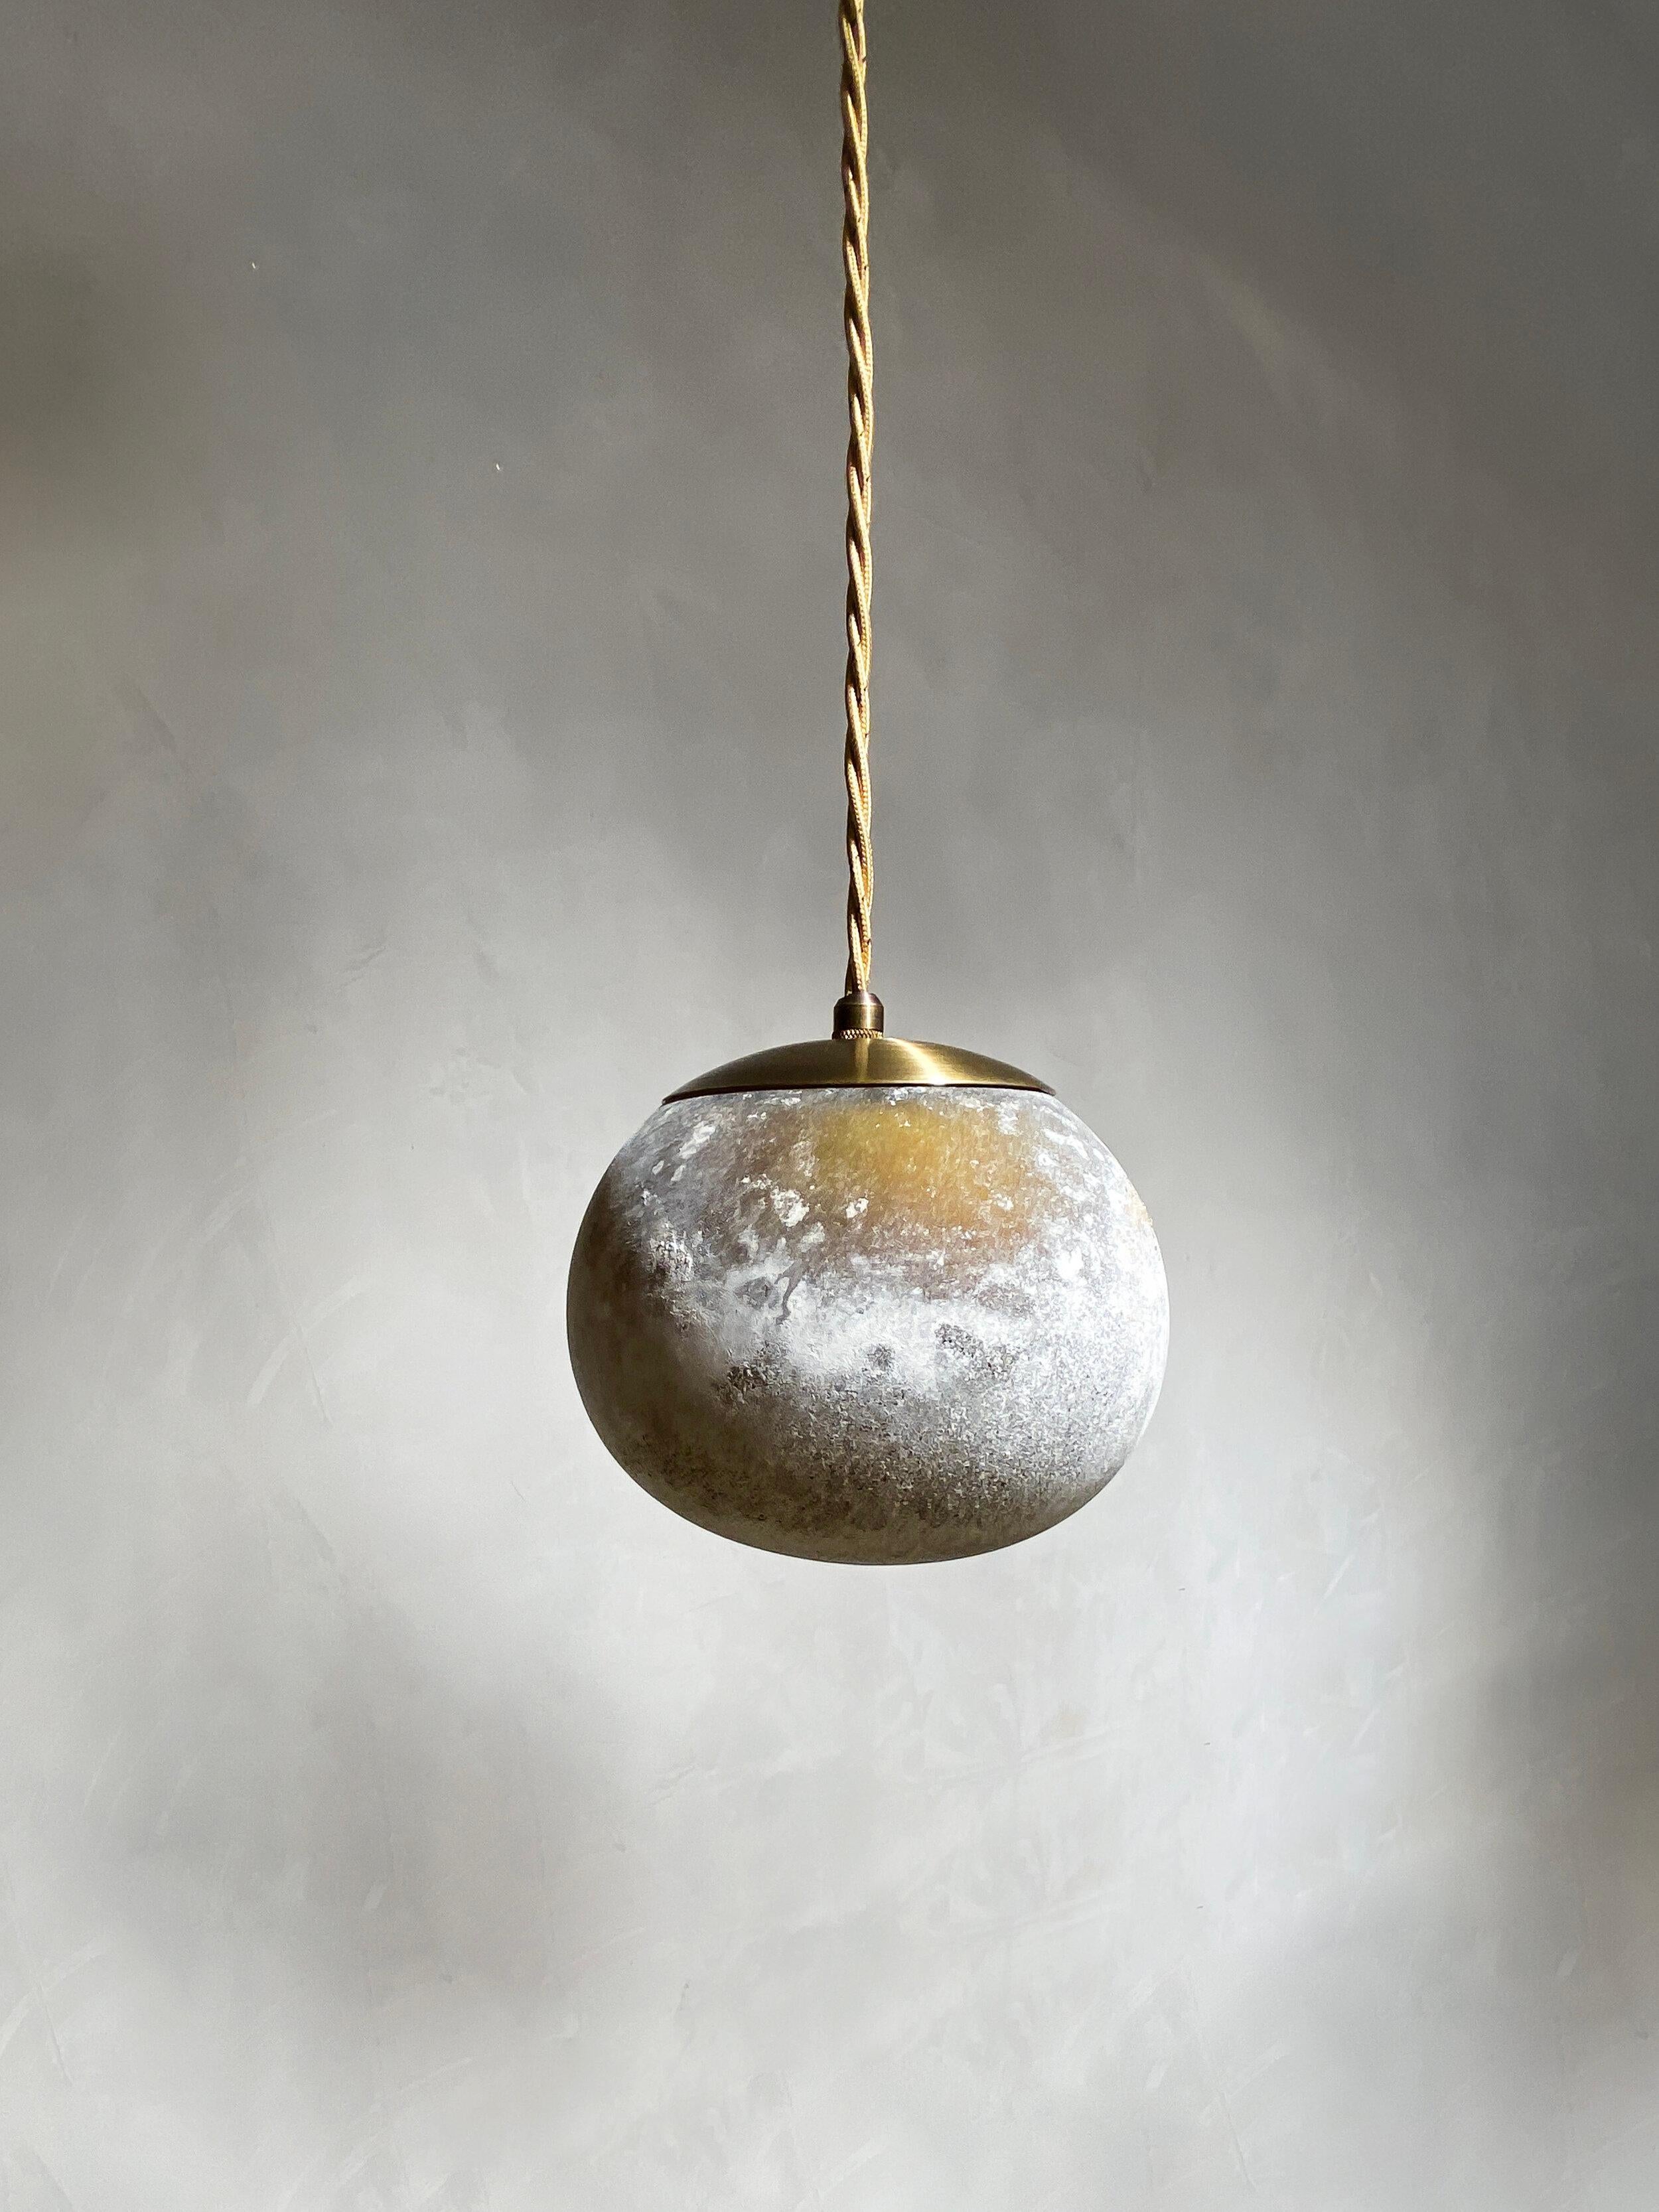 Salty Pendant Ball 14 by Contain
Dimensions: D 14 x H 100cm (custom length).
Materials: Blown glass from local production with salty process.
Available in different finishes and dimensions (14 cm Ø / 18 cm Ø / 20 cm Øx (custom length)).

All our